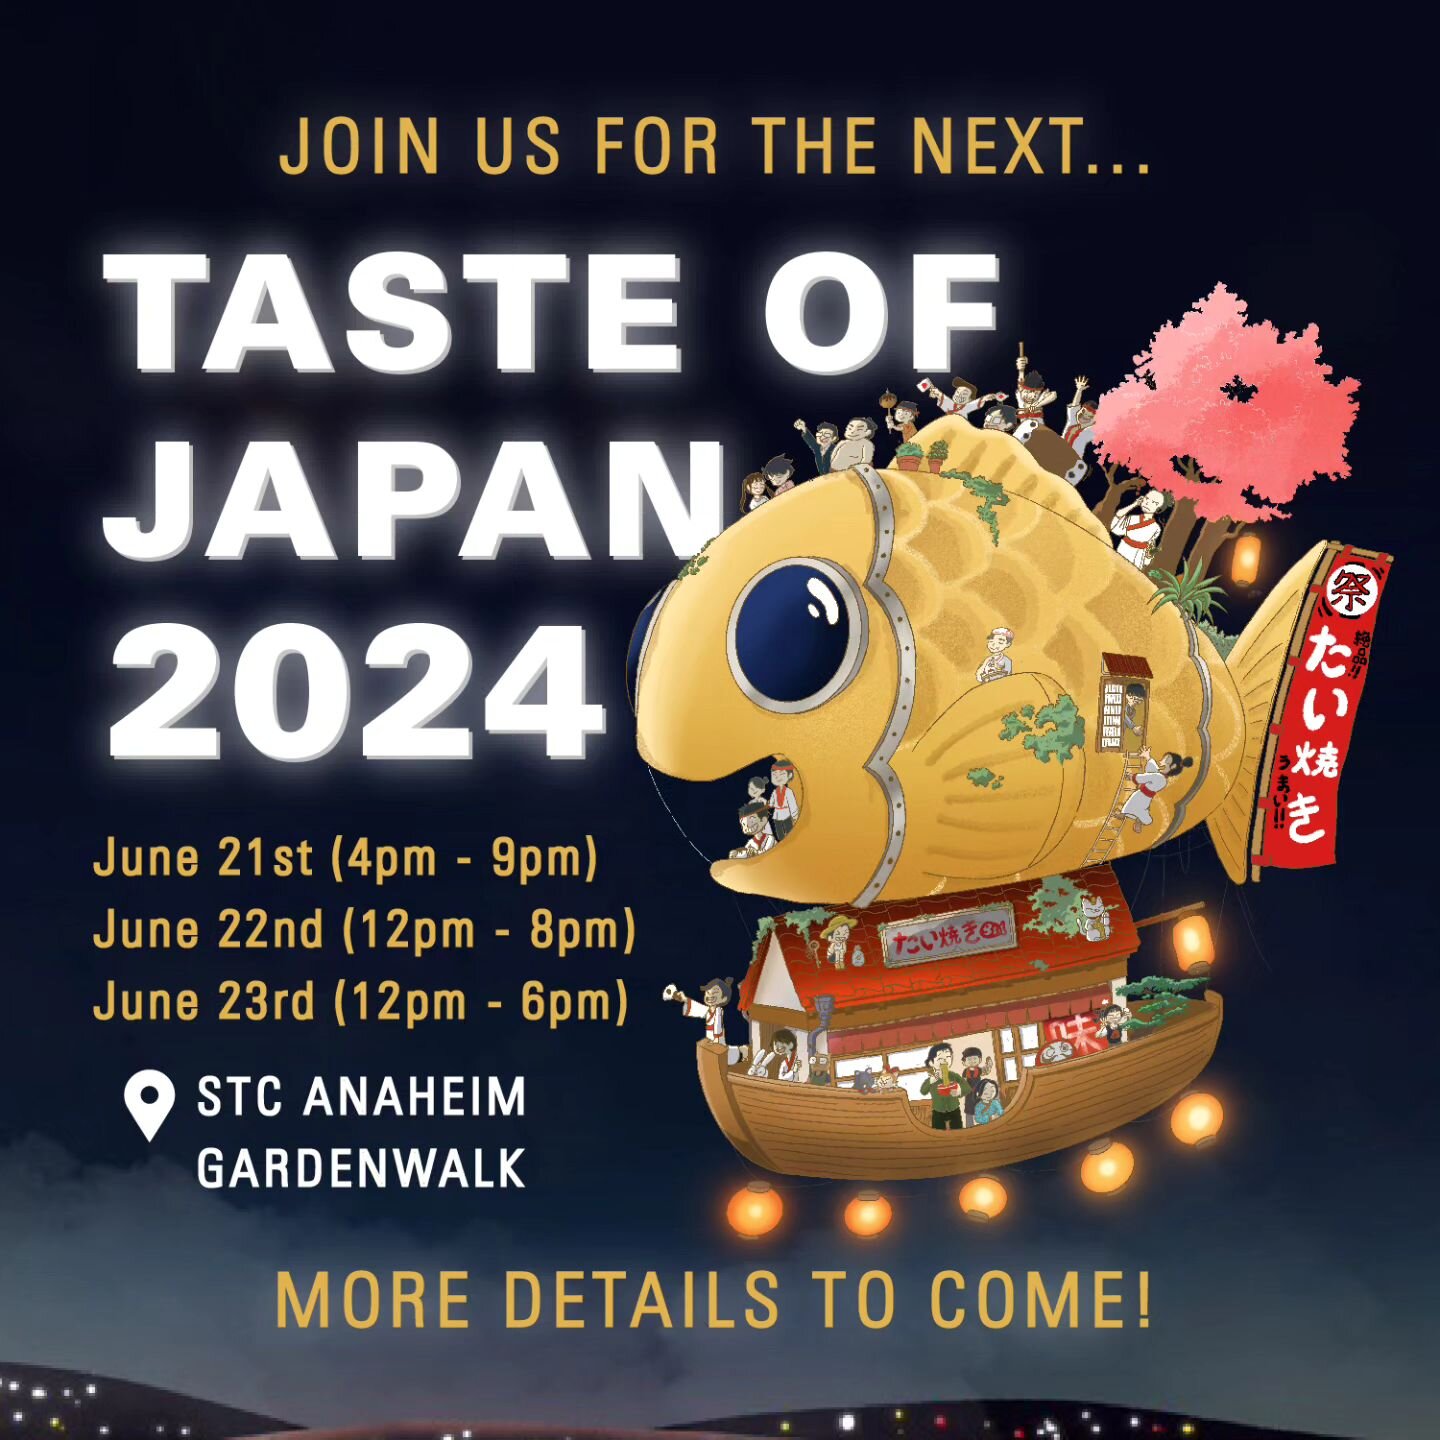 It's that time again! Time to mark your calendars because Taste of Japan 2024 is coming soon, coming back stronger than ever, for 3 DAYS this year‼️ 

Bringing back all your favorite Japanese foods, performers, and entertainment to Anaheim. Who's rea